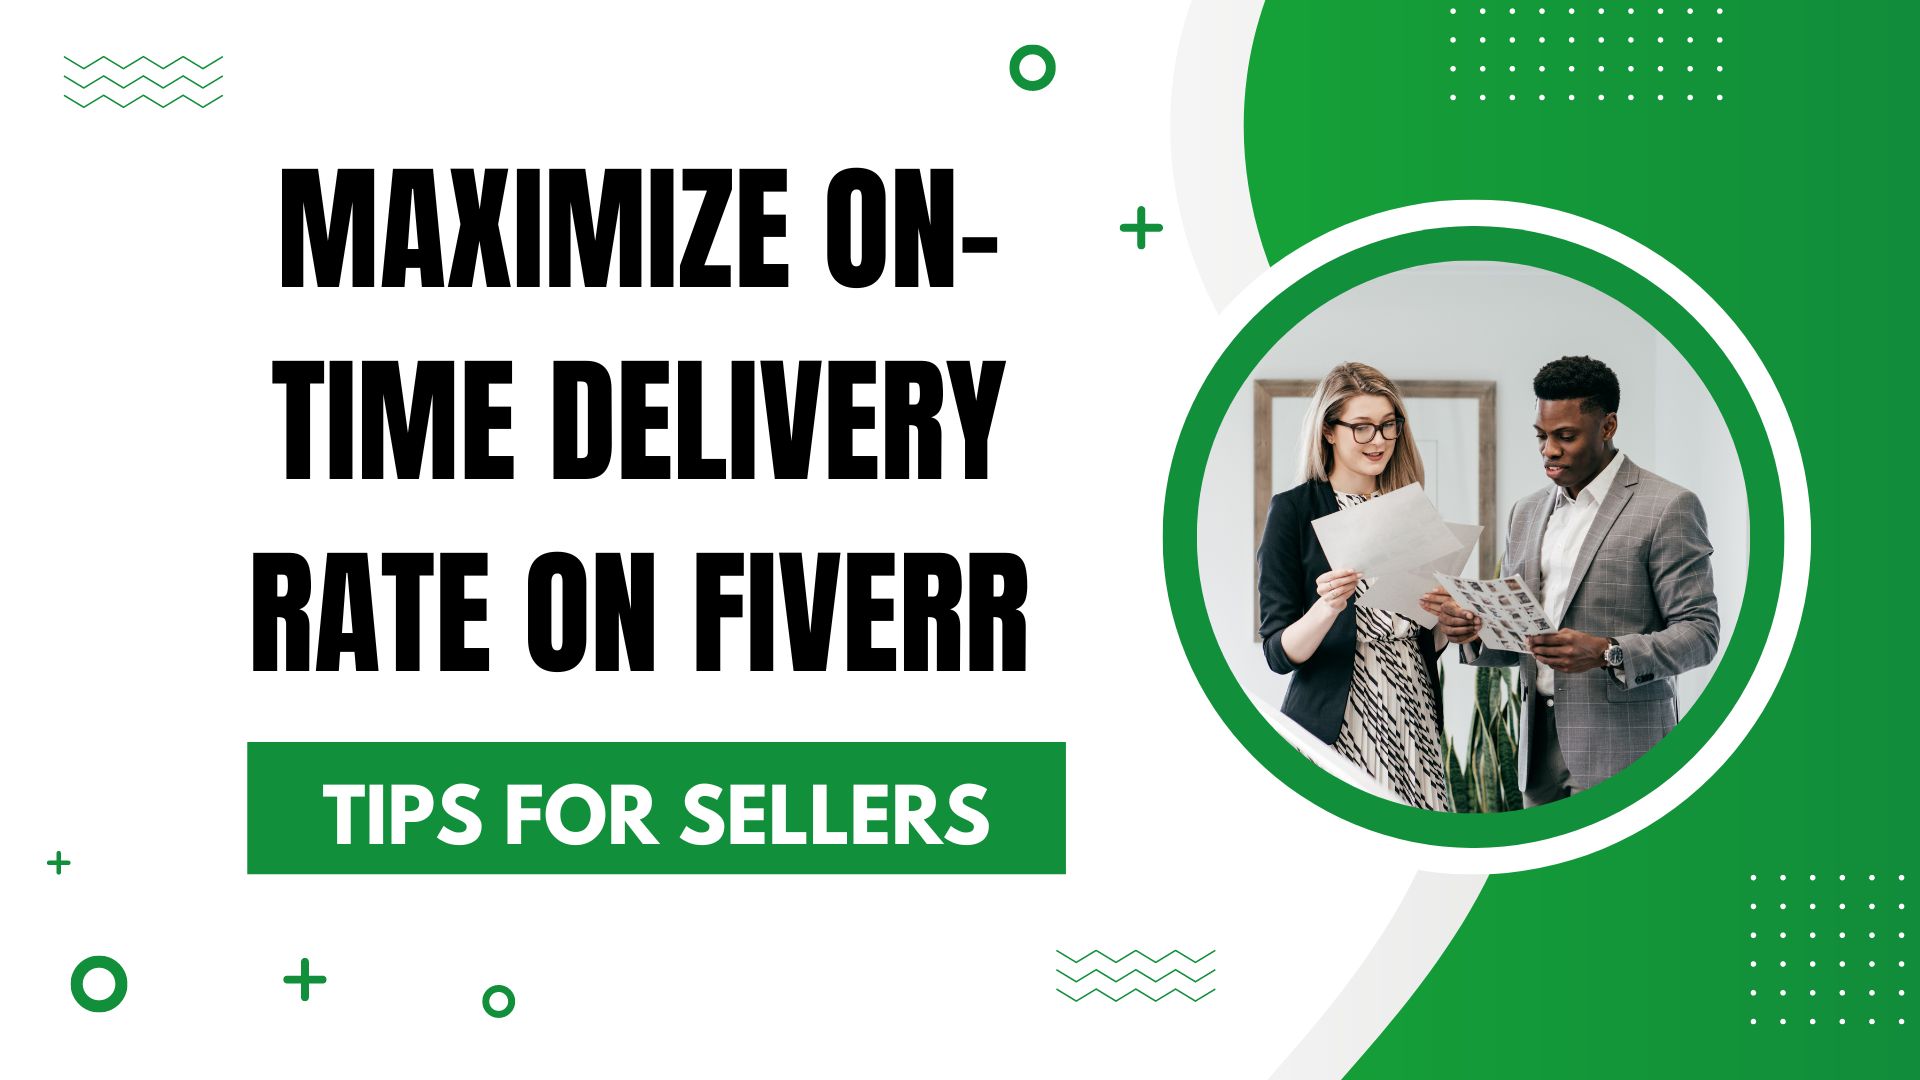 Maximize On-Time Delivery Rate on Fiverr: Useful Tips